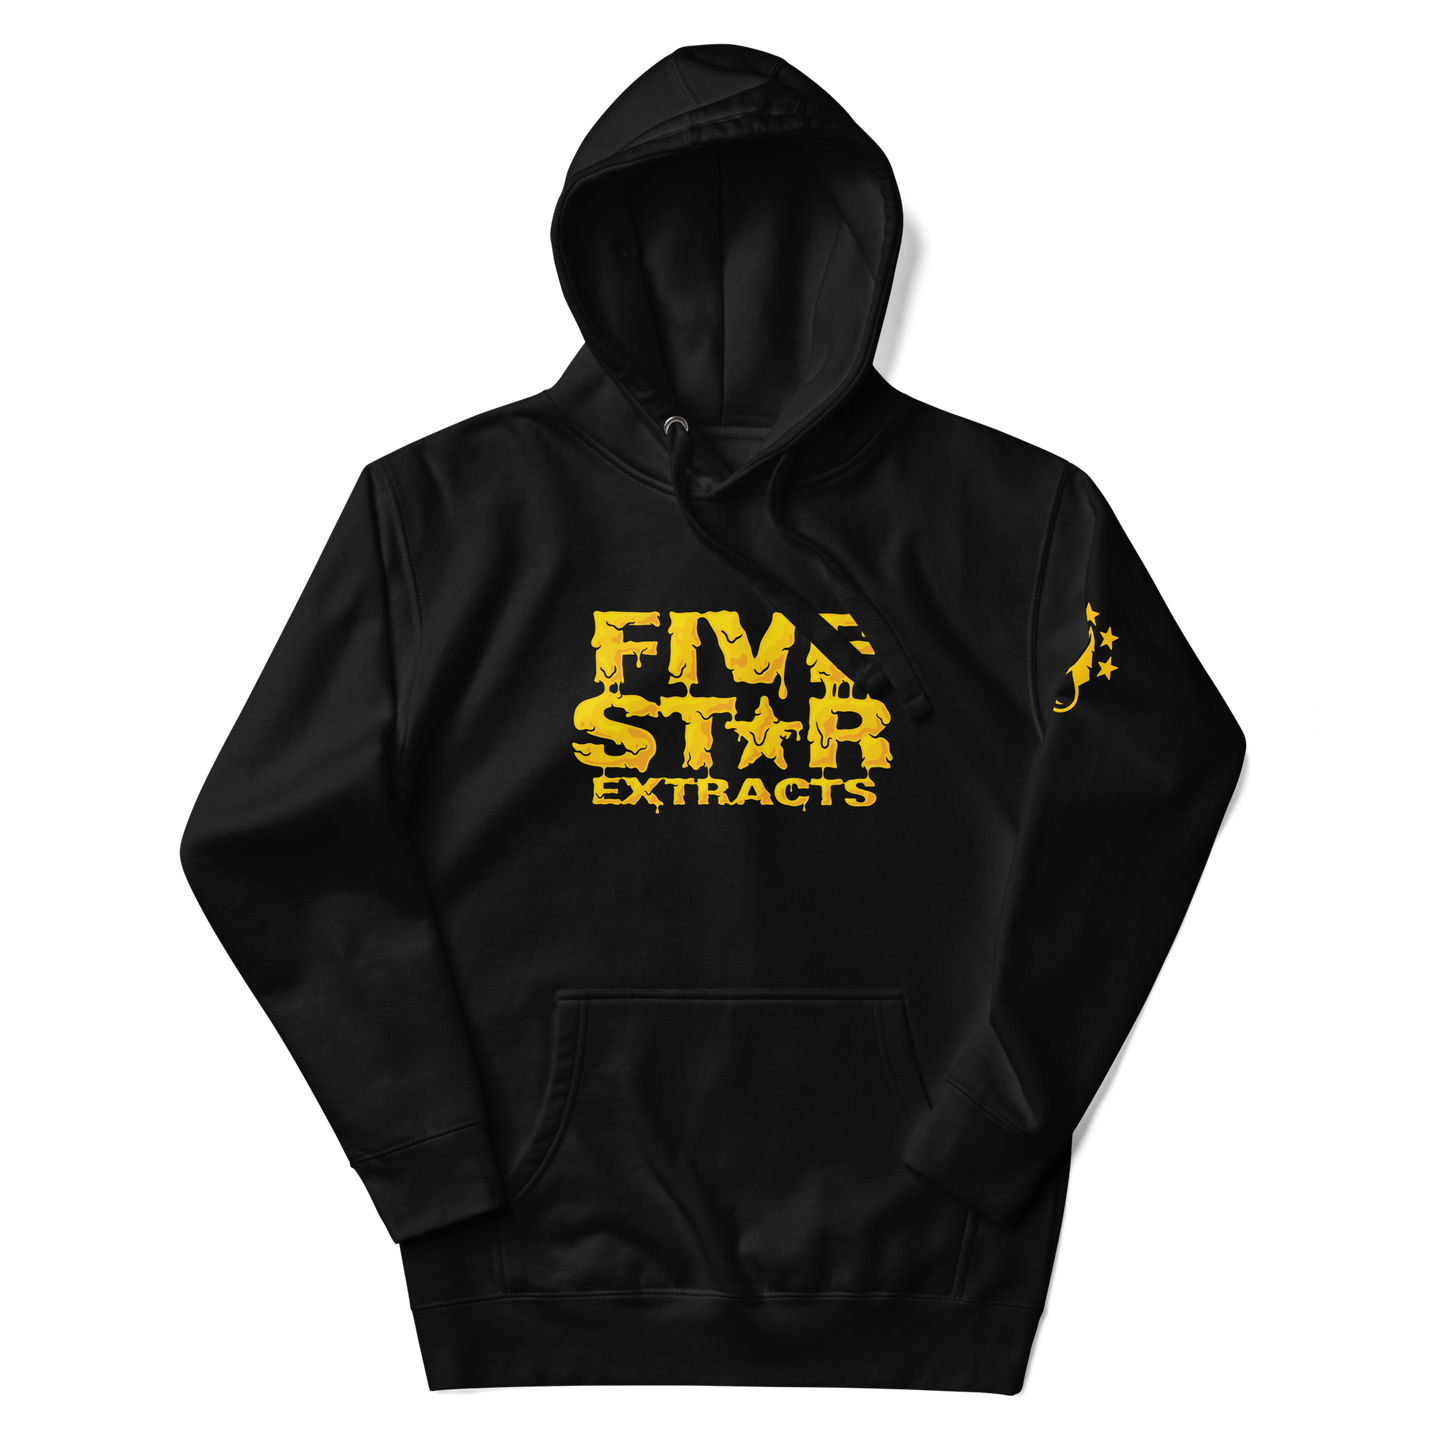 It's 710 Somewhere Five Star Extracts Hoodie